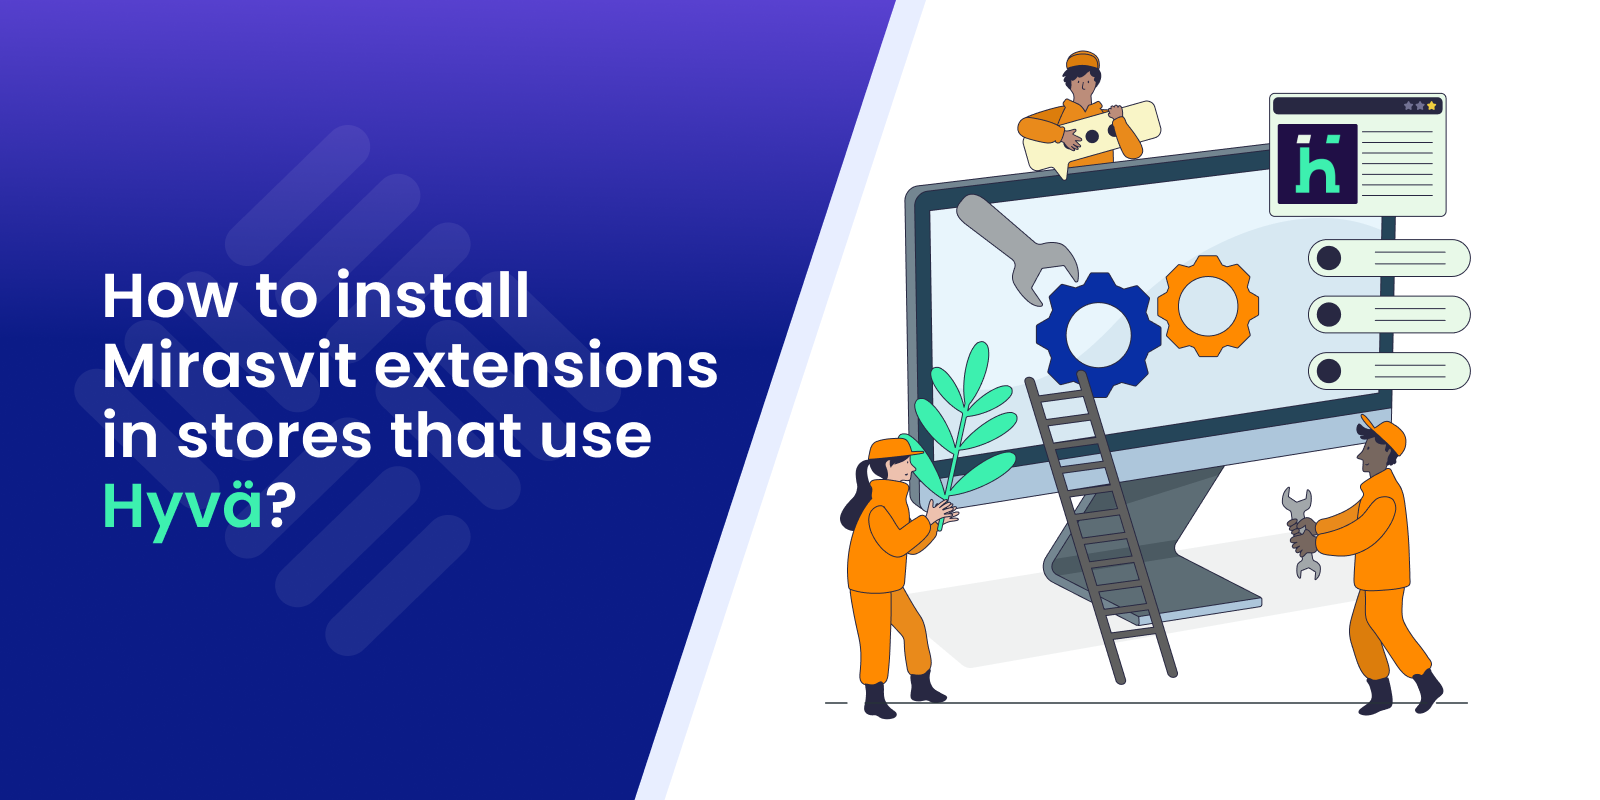 How a Magento store with Hyva can install Mirasvit extensions